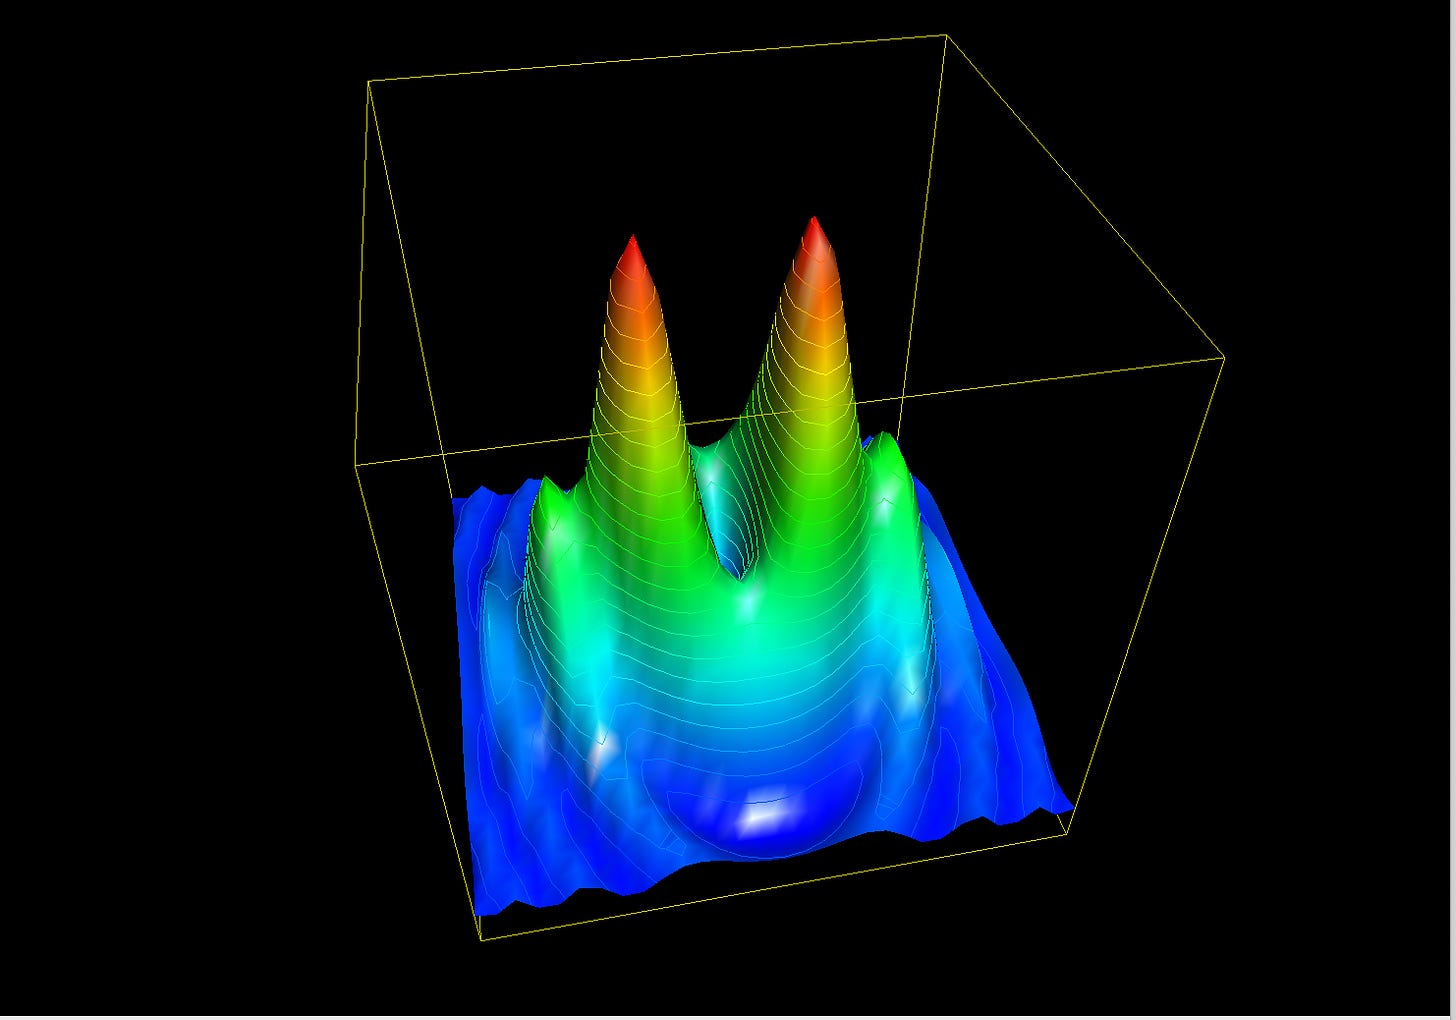 A 3D surface, generated by Apple’s Grapher, with two big peaks in the centre